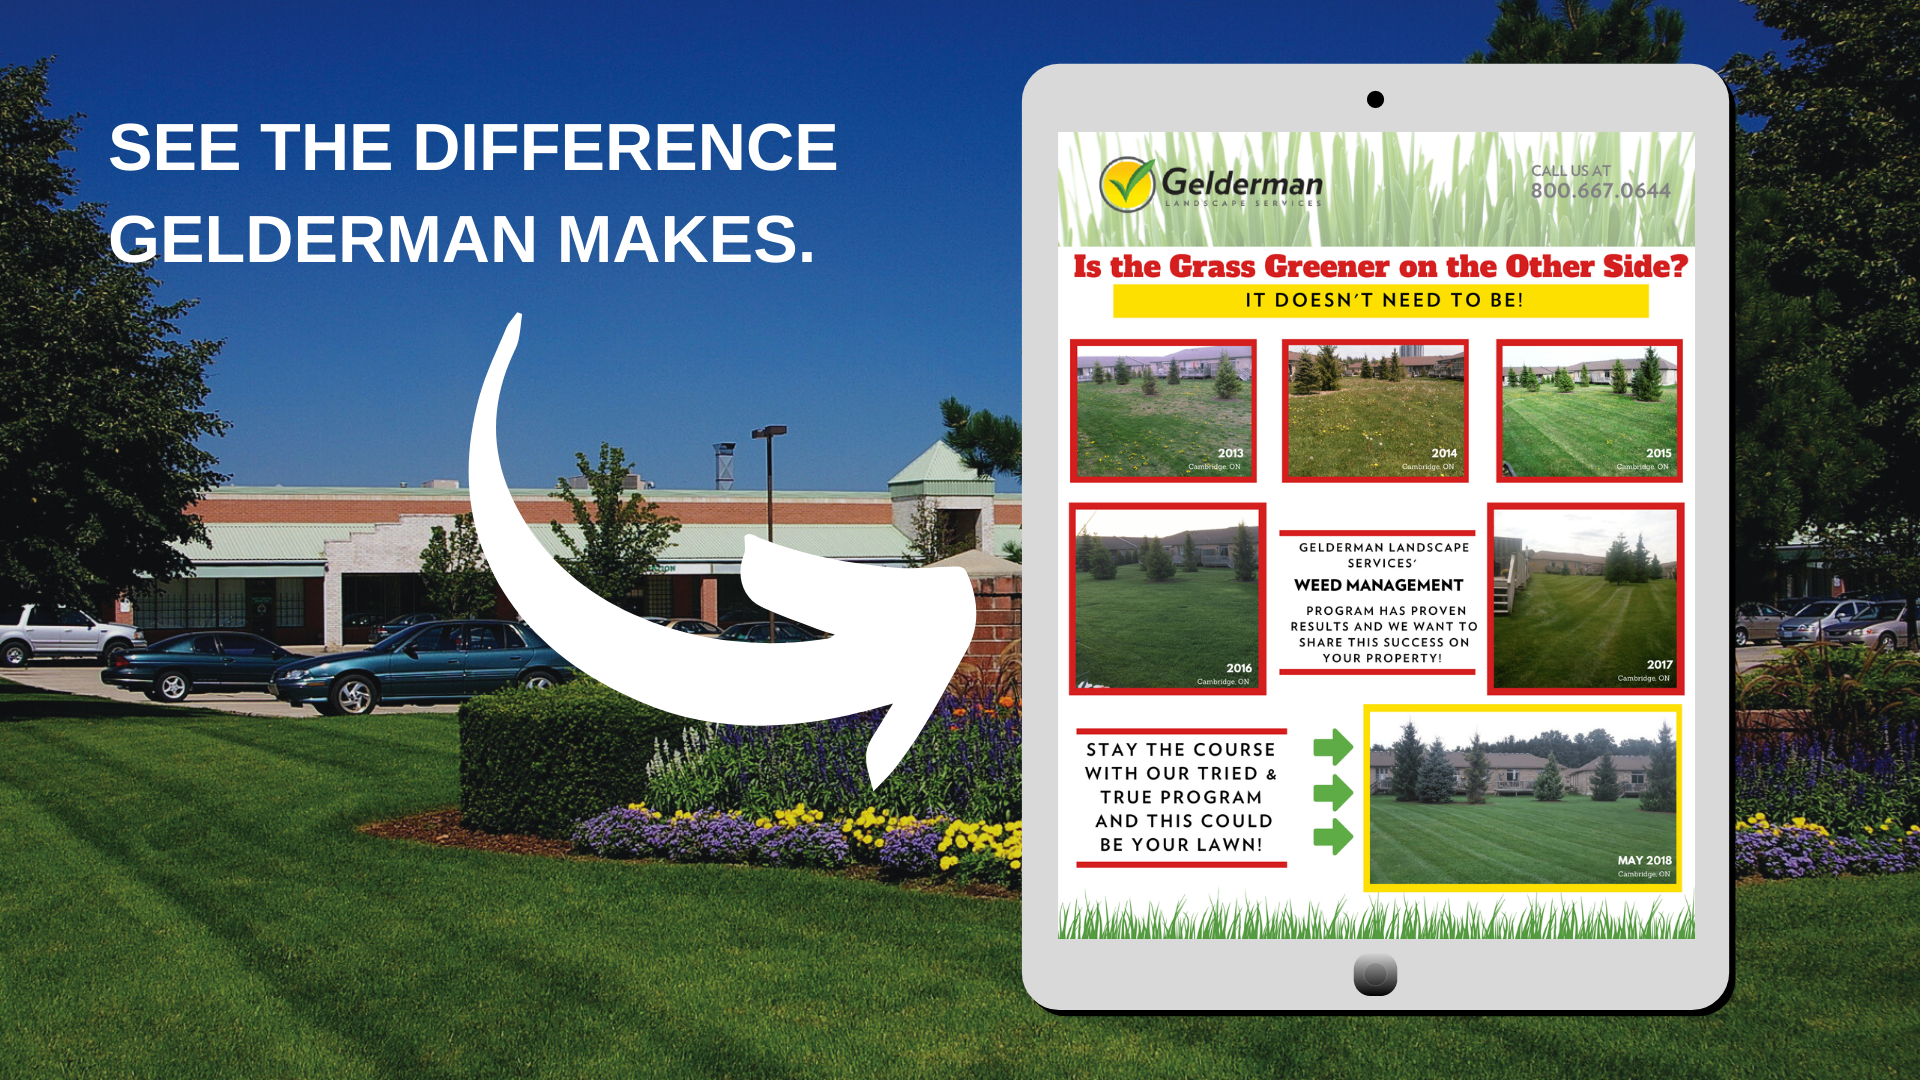 White text reads "See the difference Gelderman makes" with an arrow pointing to an illustration of an electronic tablet with text reading "Is the grass greener on the other side? It doesn't need to be! Gelderman Landscape Services' weed management program has proven results and we want to share that success on your property! Stay the course with out tried and true program and this could be your lawn!" Three green arrows point to a image of a beautifully manicured green lawn.